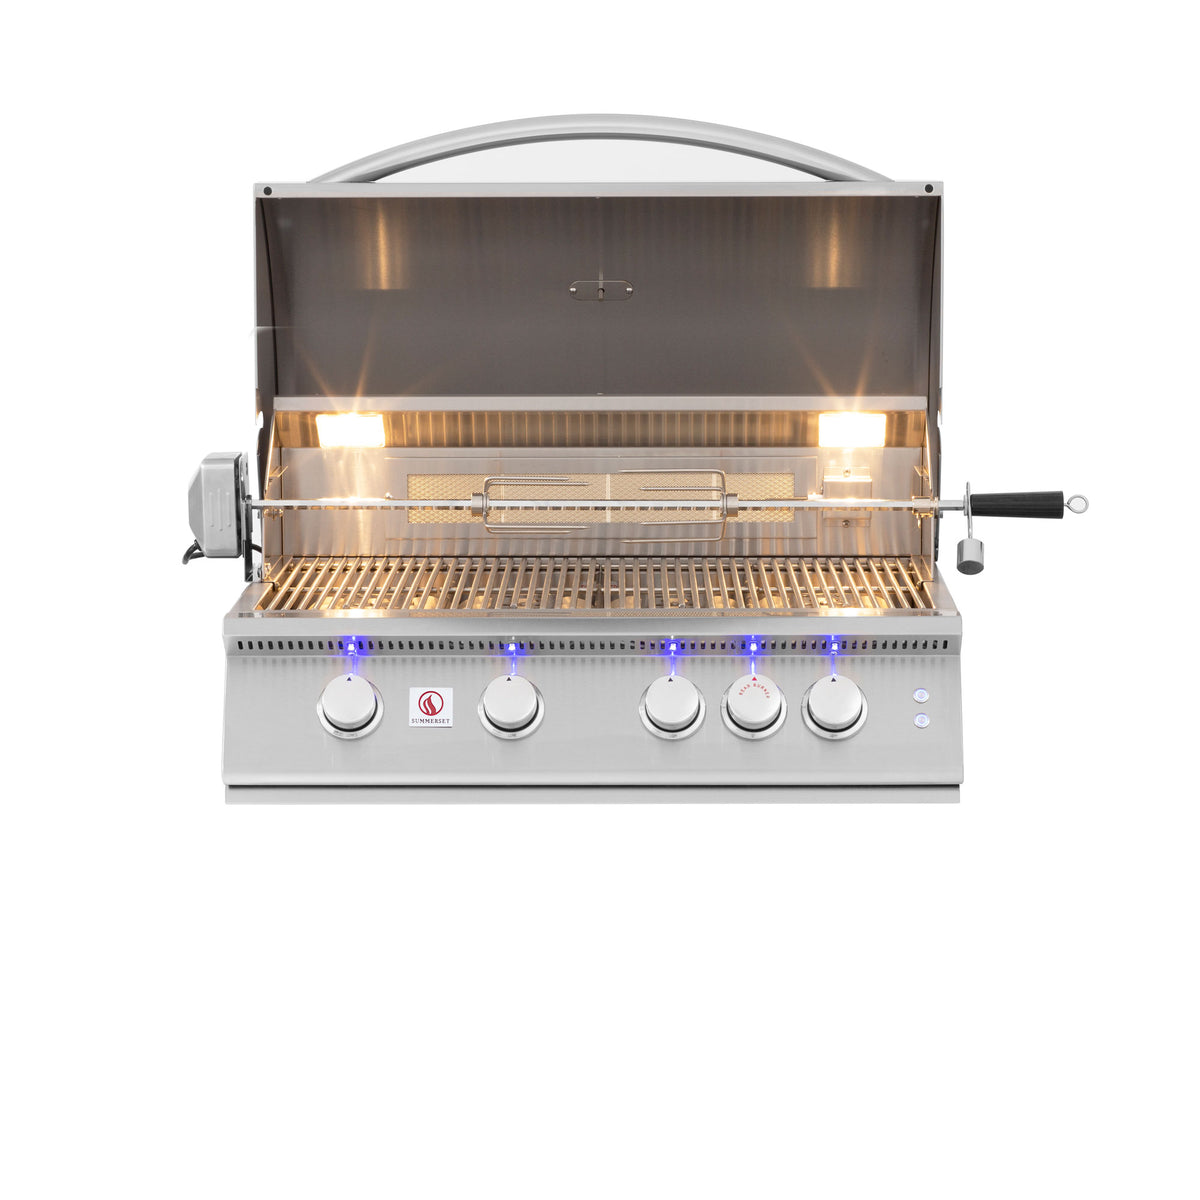 Elements Pro 32” Built-In Stainless Steel Grill for Outdoor Cooking